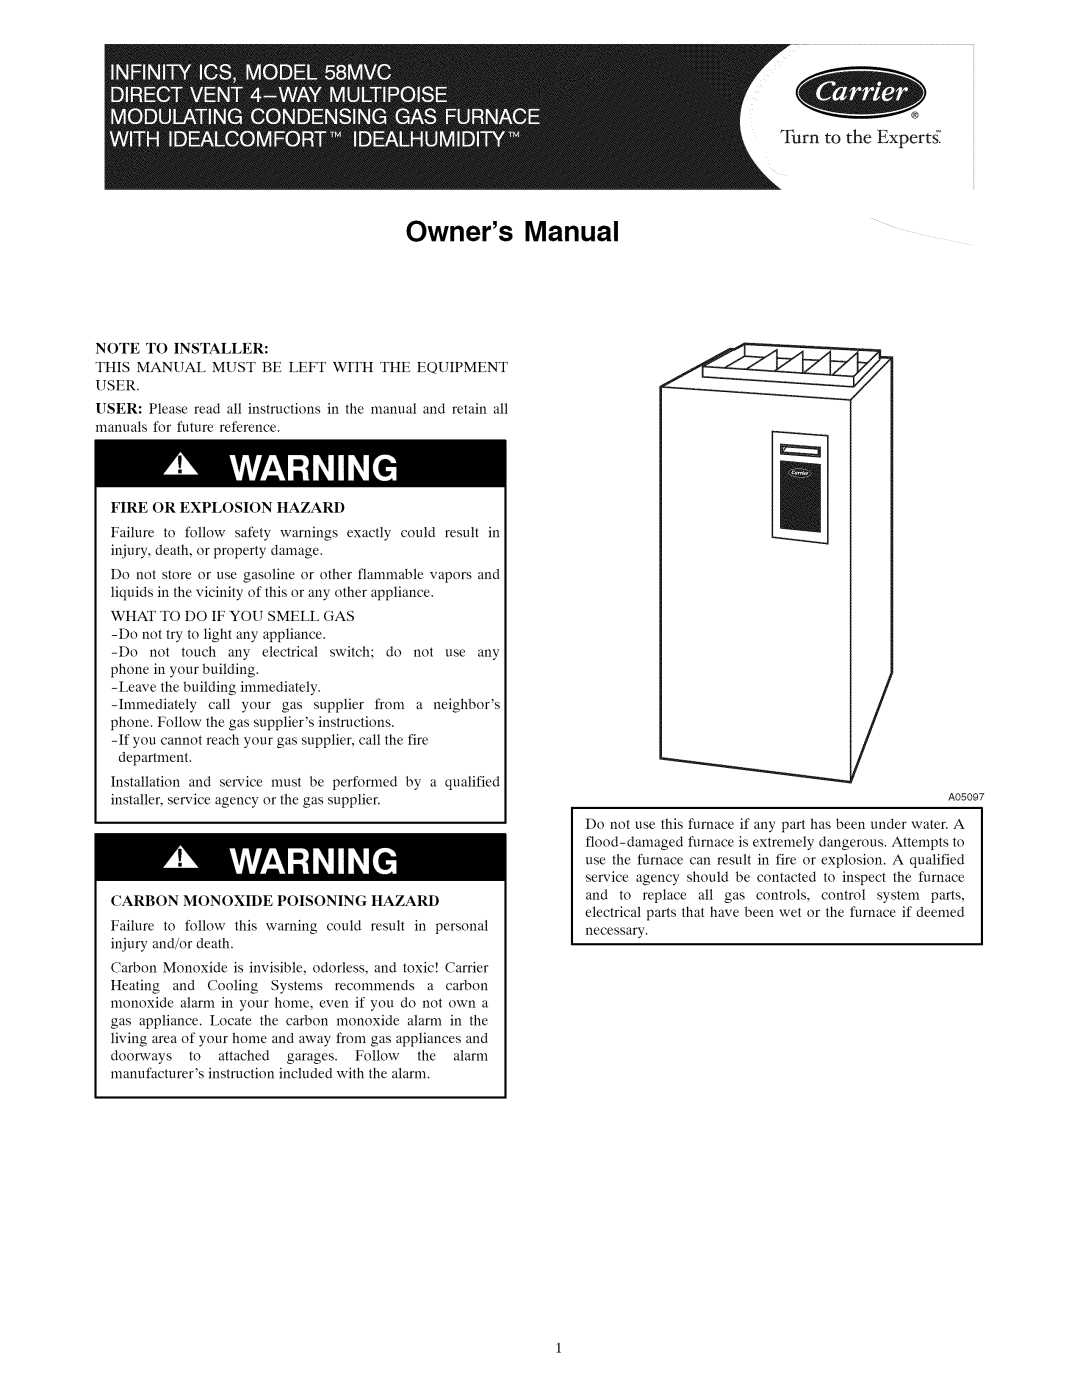 Carrier 58MVC owner manual OwnersManual, rn to the Expertg 